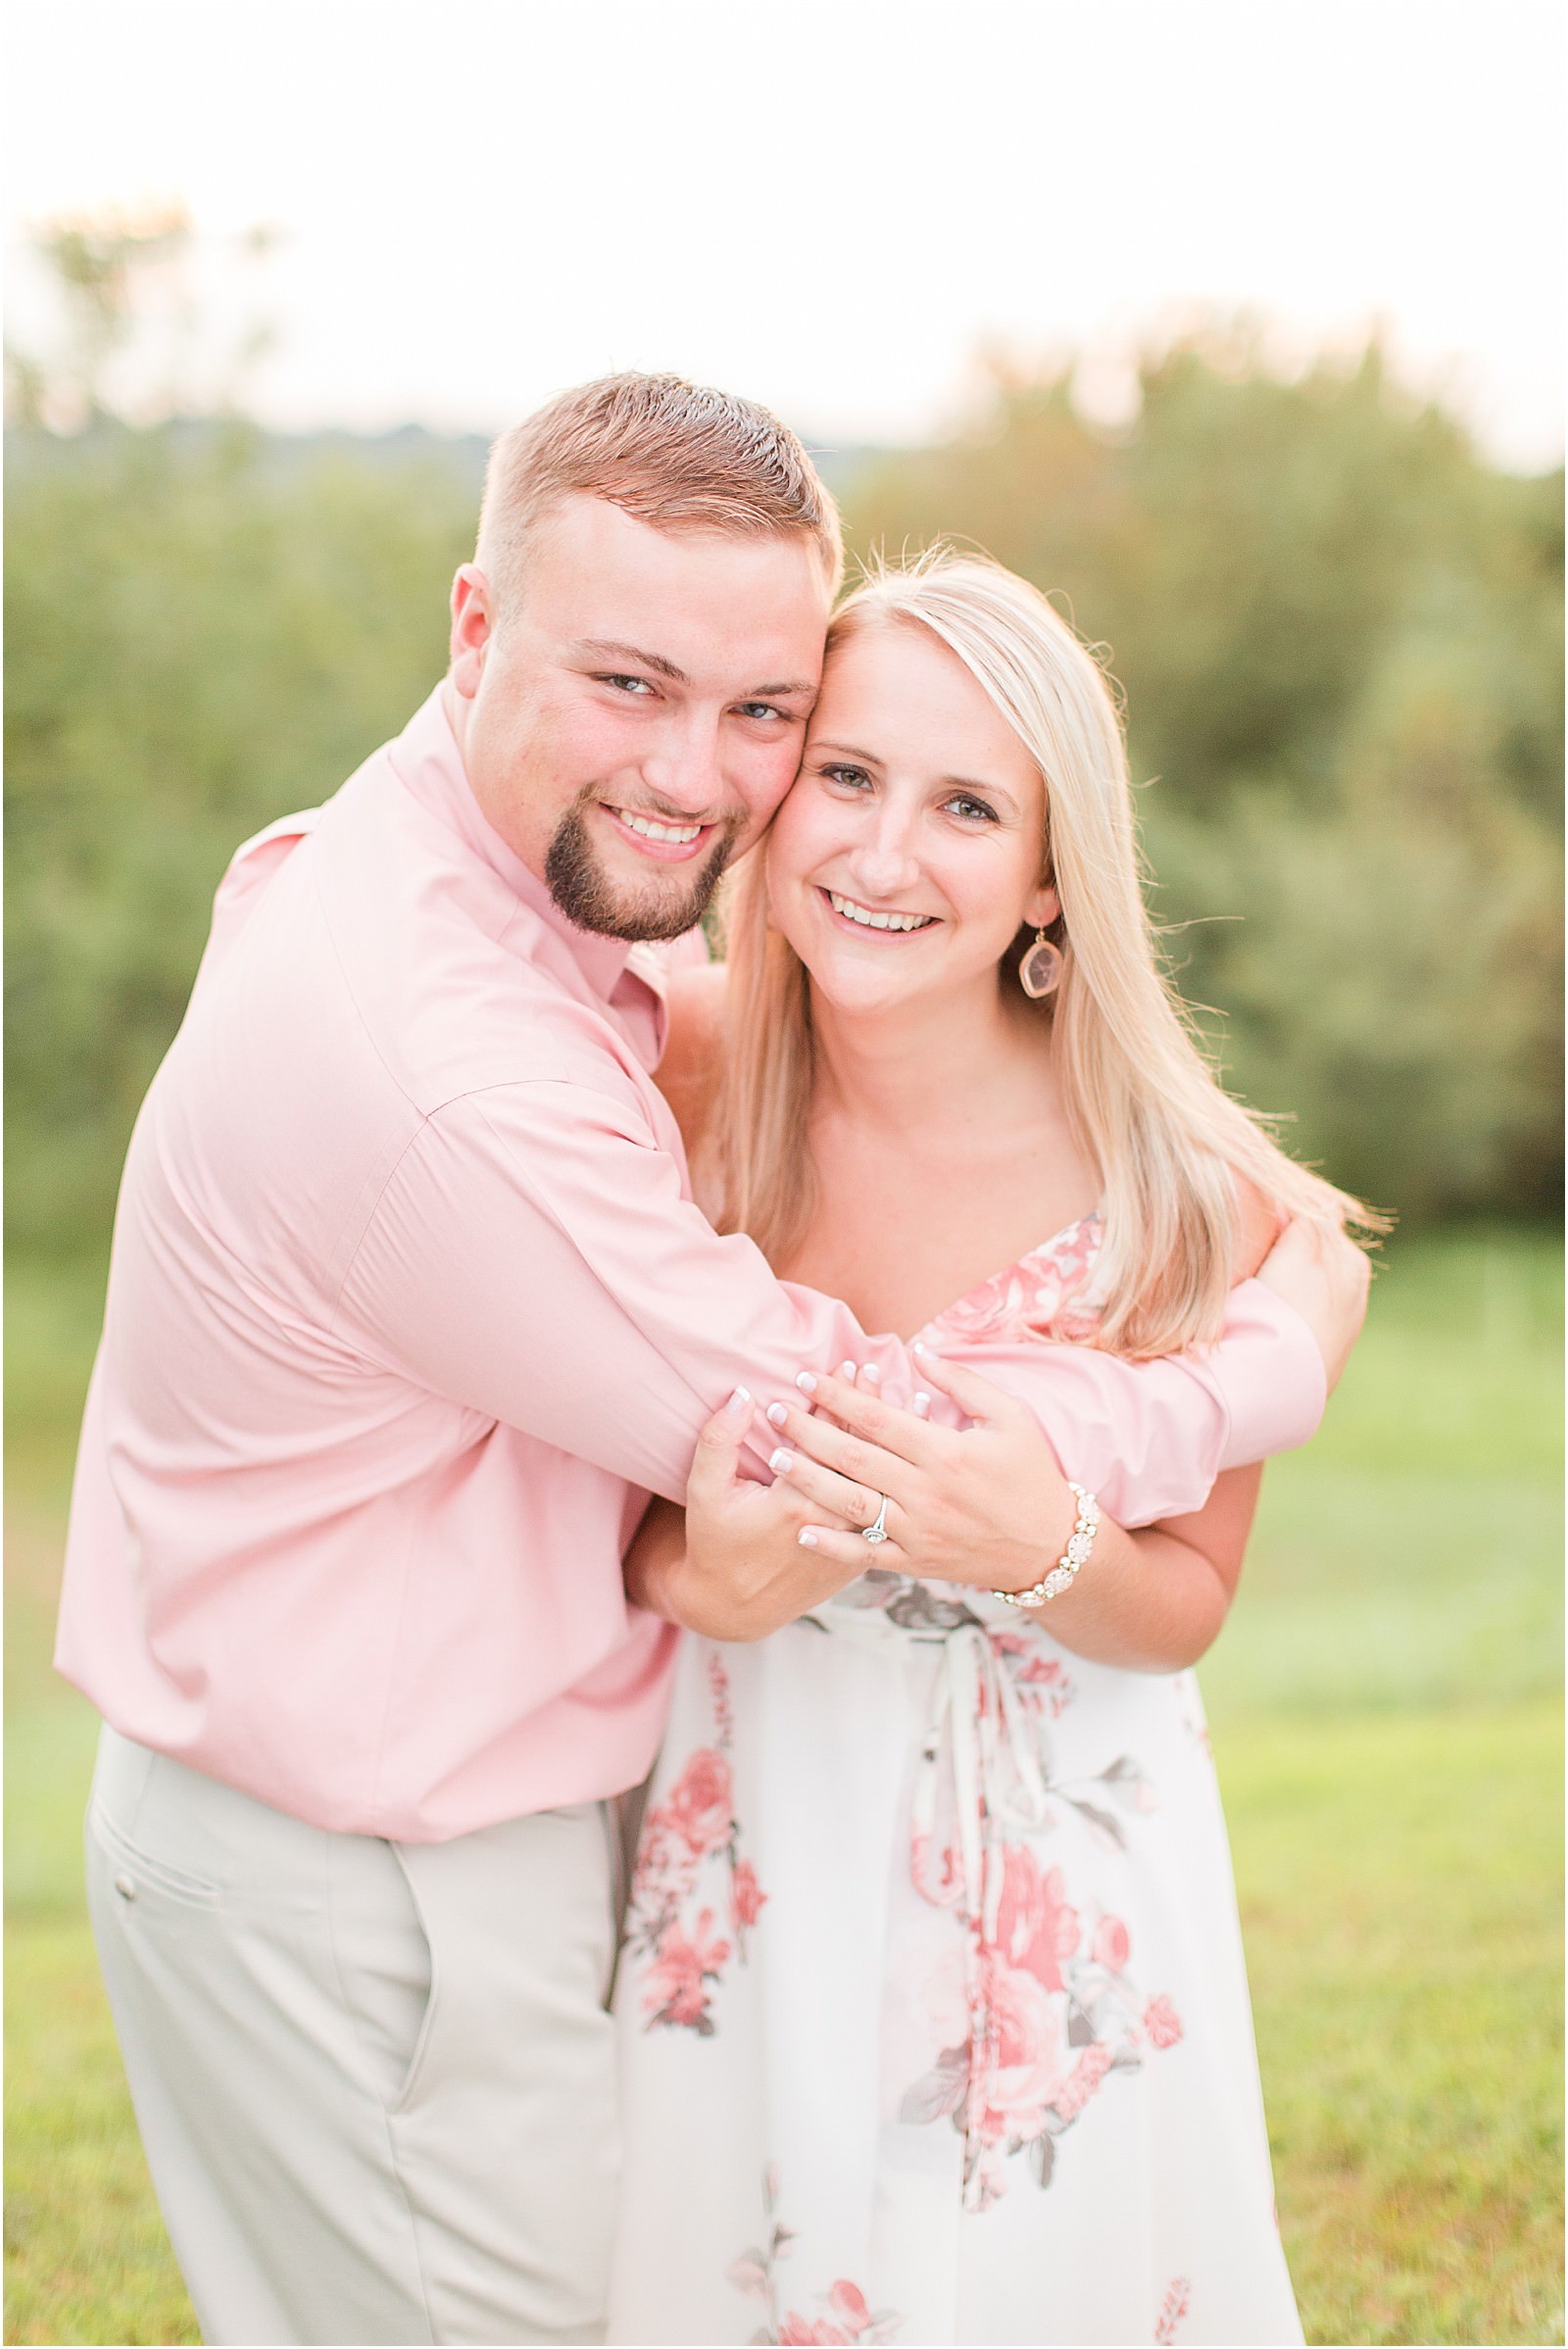 Lauren and Bryce | The Corner House B&ed and Breakfast Engagement Session | Bret and Brandie Photography 021.jpg